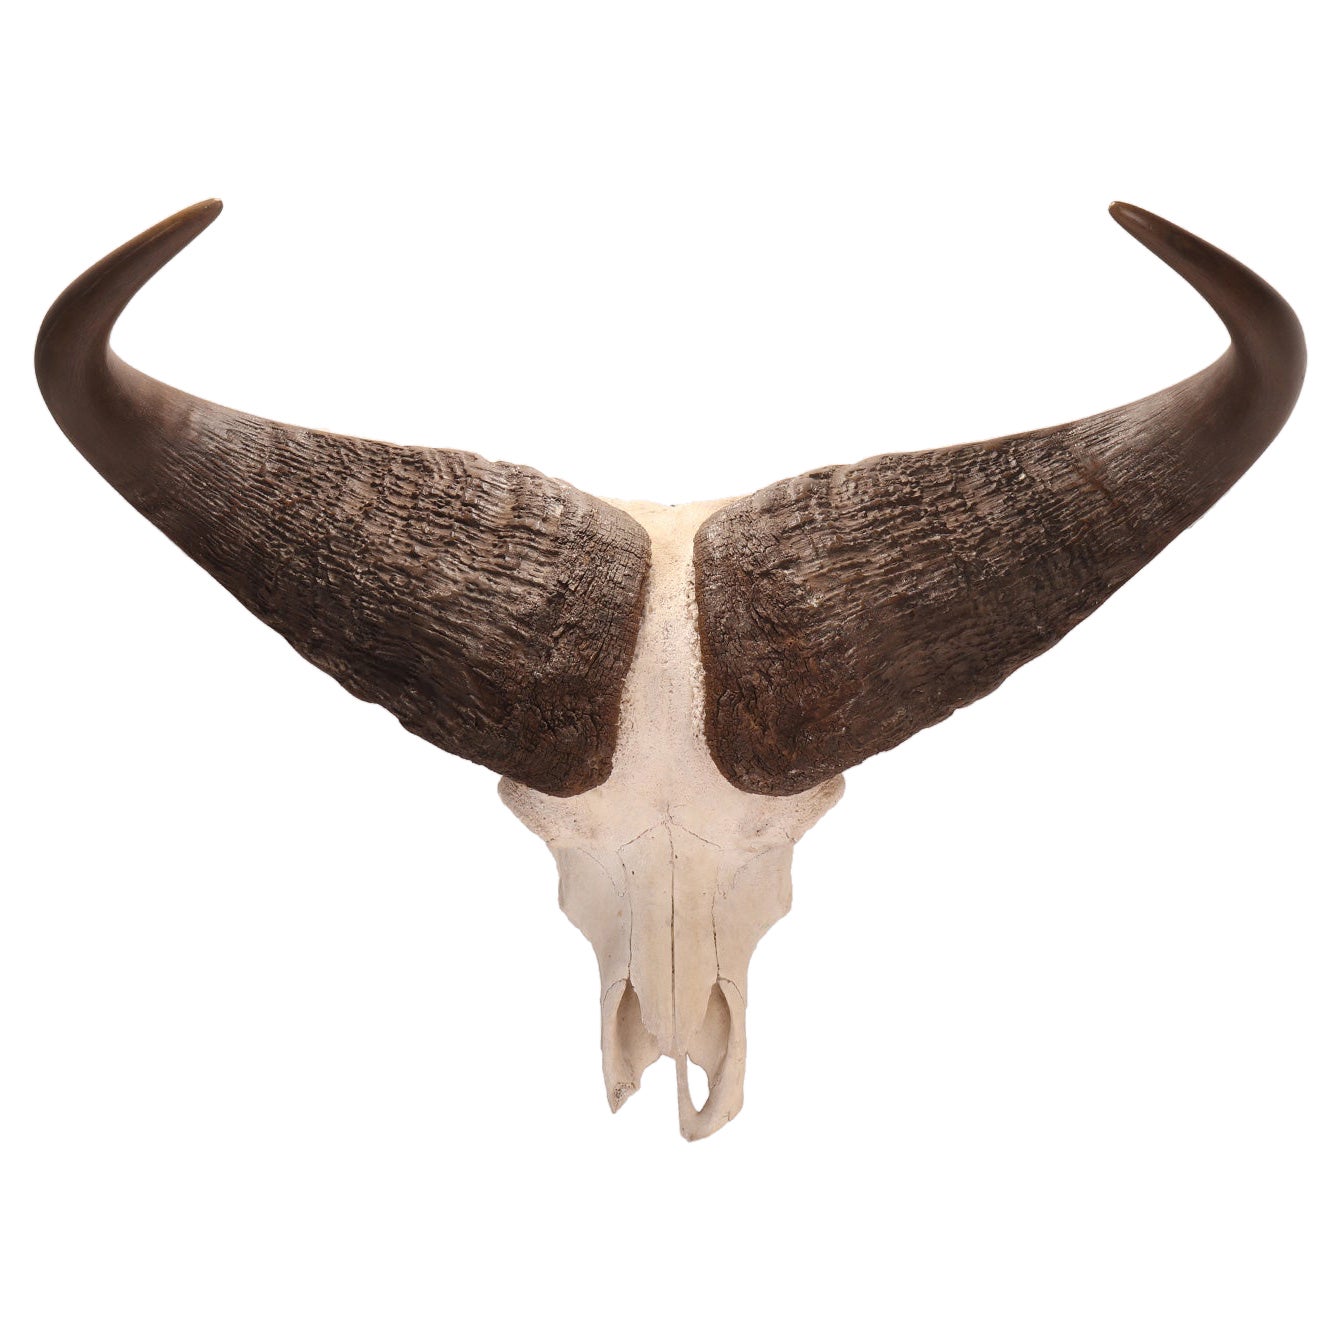 Natural Specimen a Trophy of a Bufalo Skull, Africa, 1890